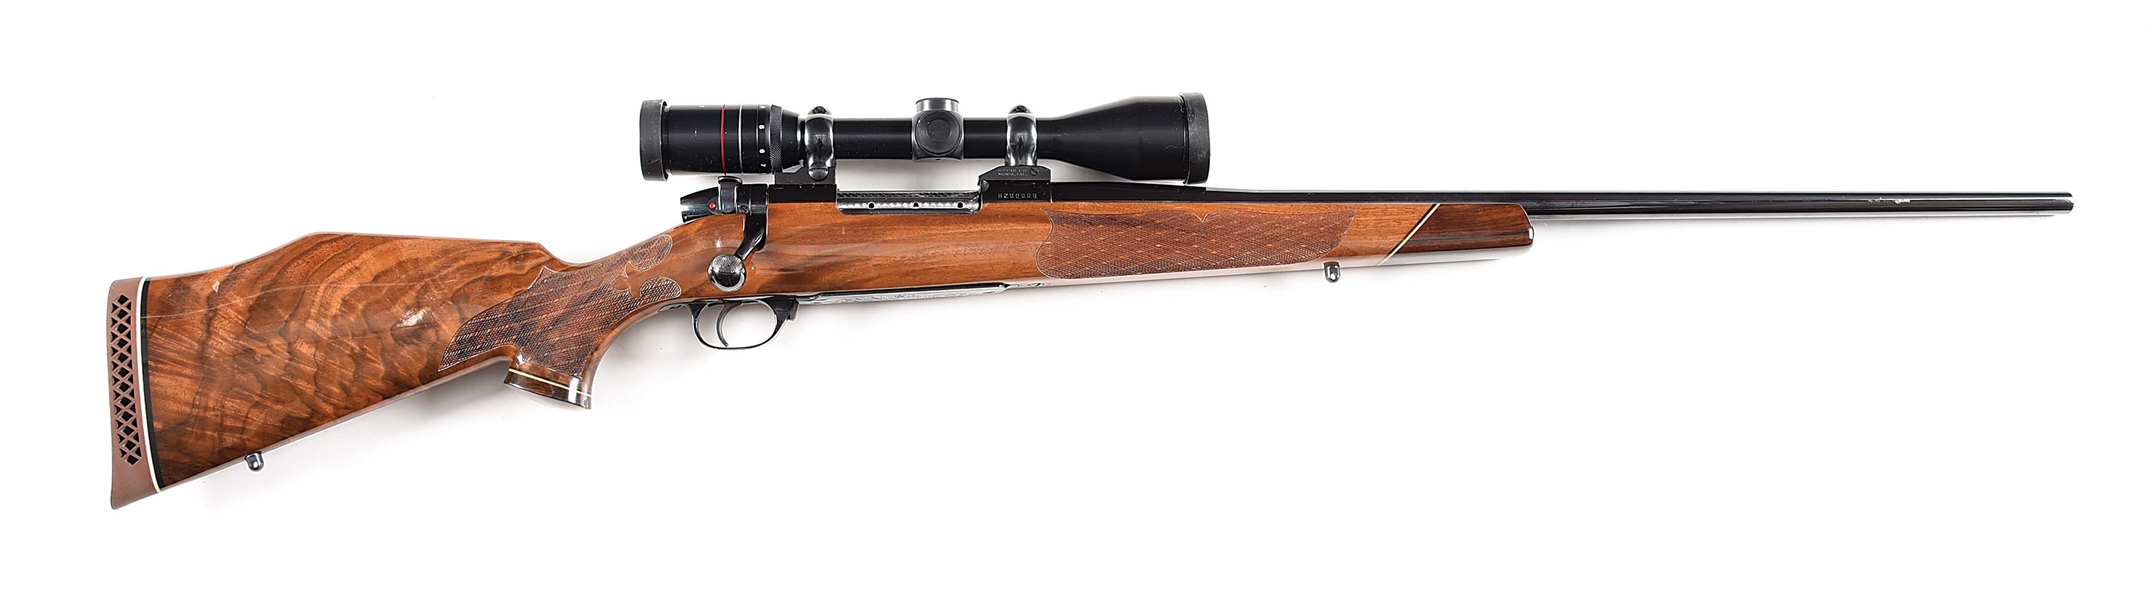 (M) WEATHERBY MARK V BOLT ACTION RIFLE IN .340 WEATHERBY MAGNUM.